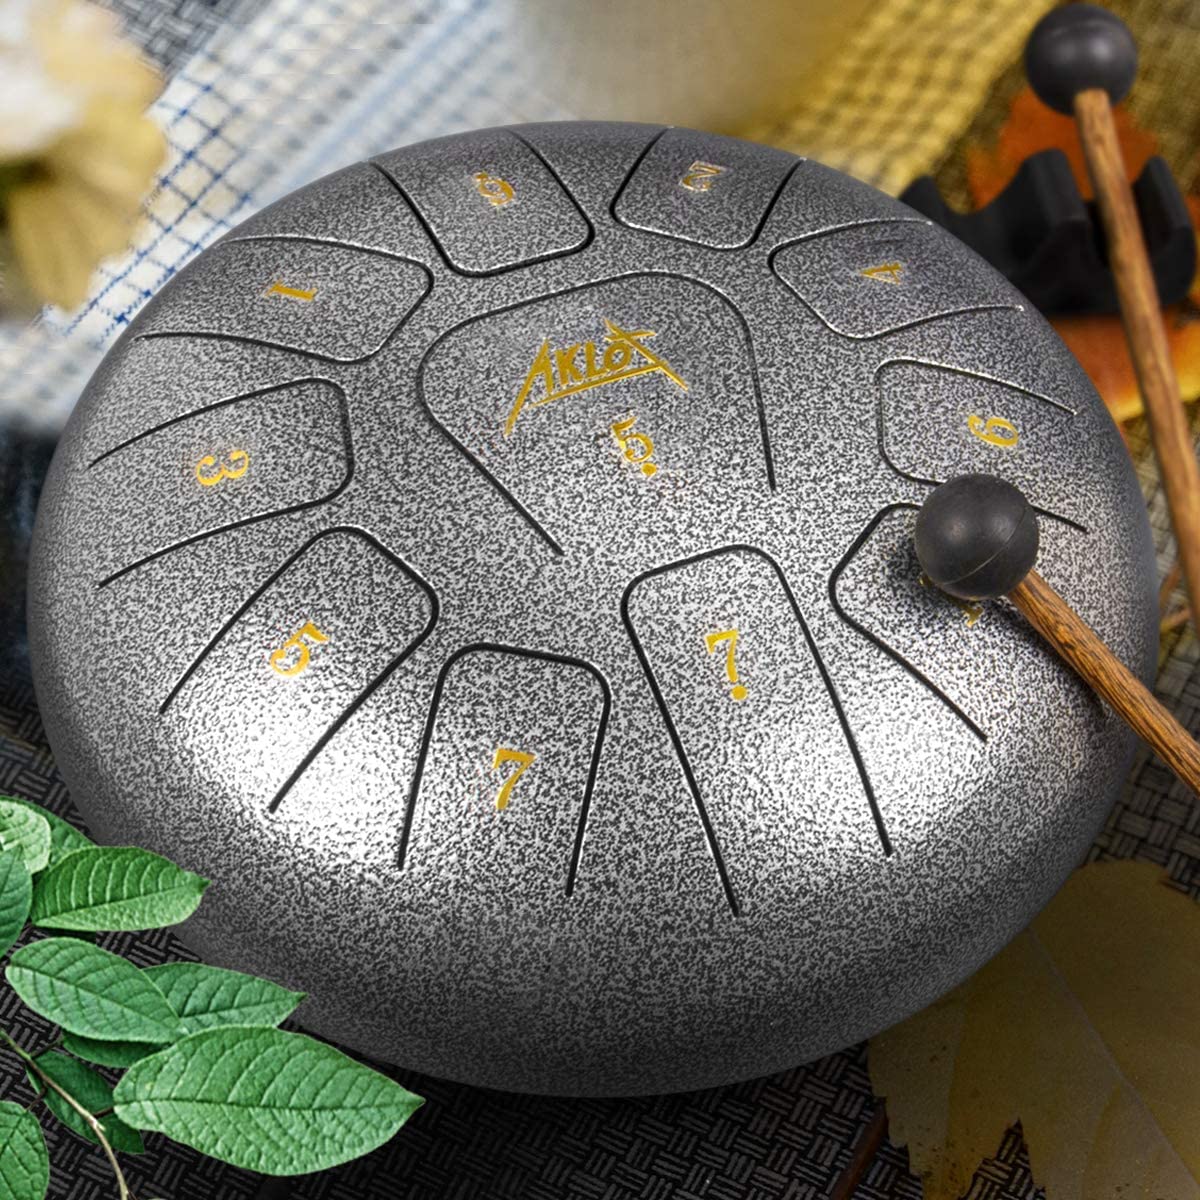 Steel Tongue Drum, AKLOT 10 inch 11 Notes Tank Drum C Key Percussion Steel Drum Kit w/Drum Mallets Note Stickers Finger Picks Mallet Bracket and Gig Bag - AKLOT